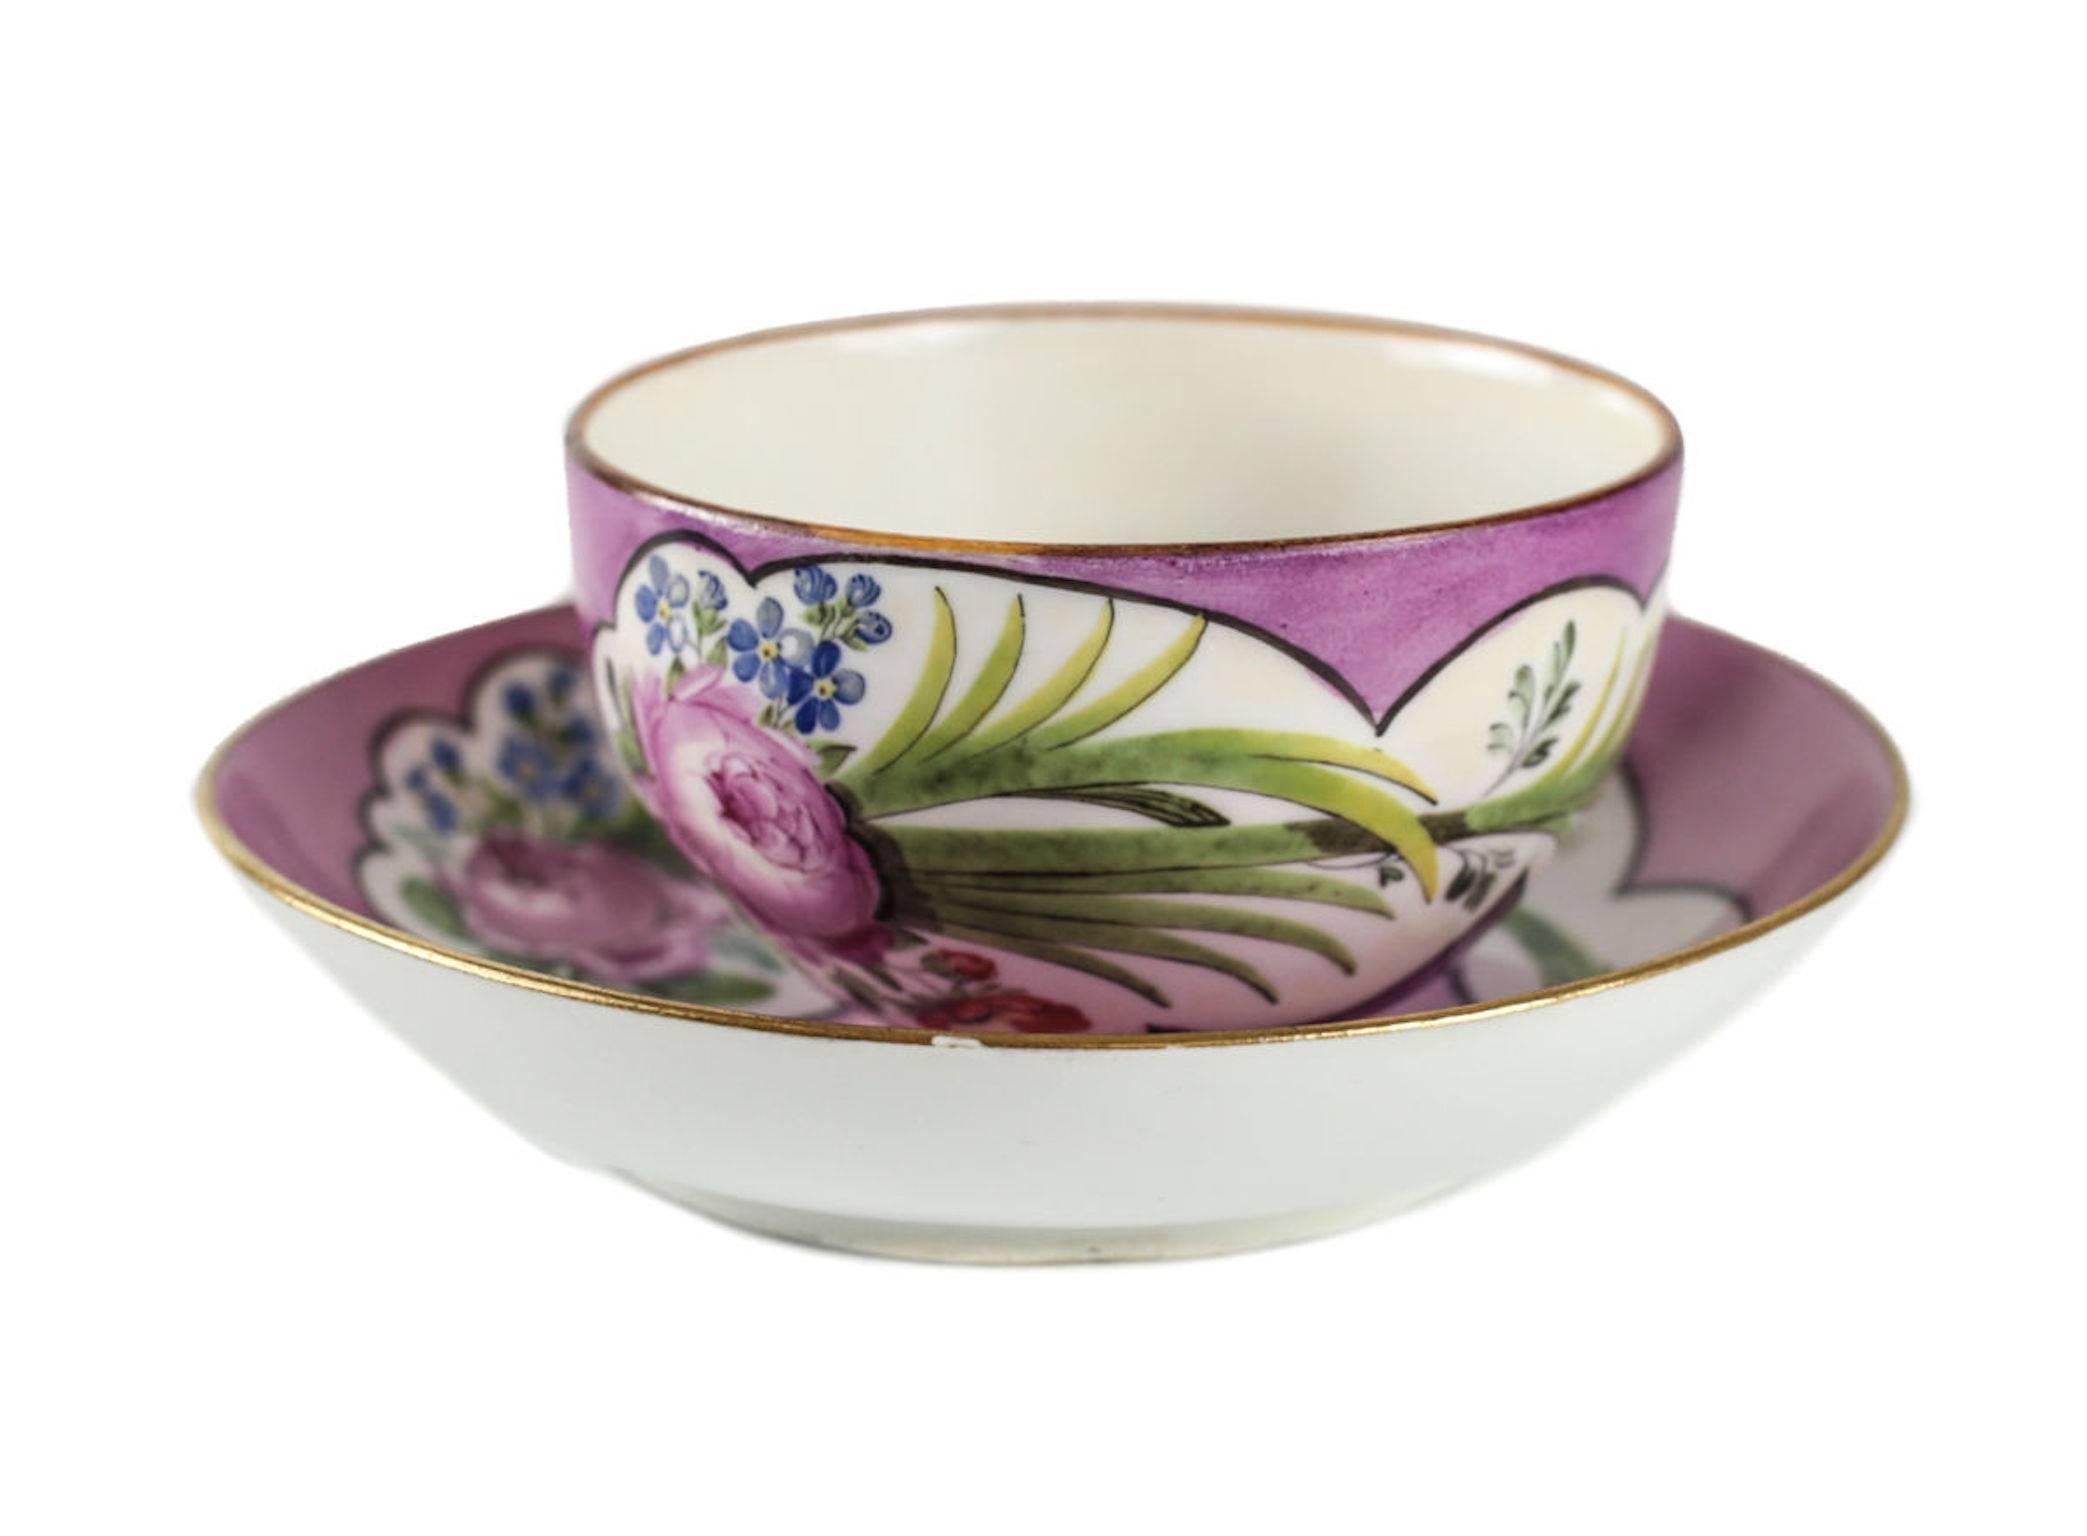 Meissen Marcolini Porcelain Cup and Saucer Hand-Painted Pink Rose, circa 1800 For Sale 2